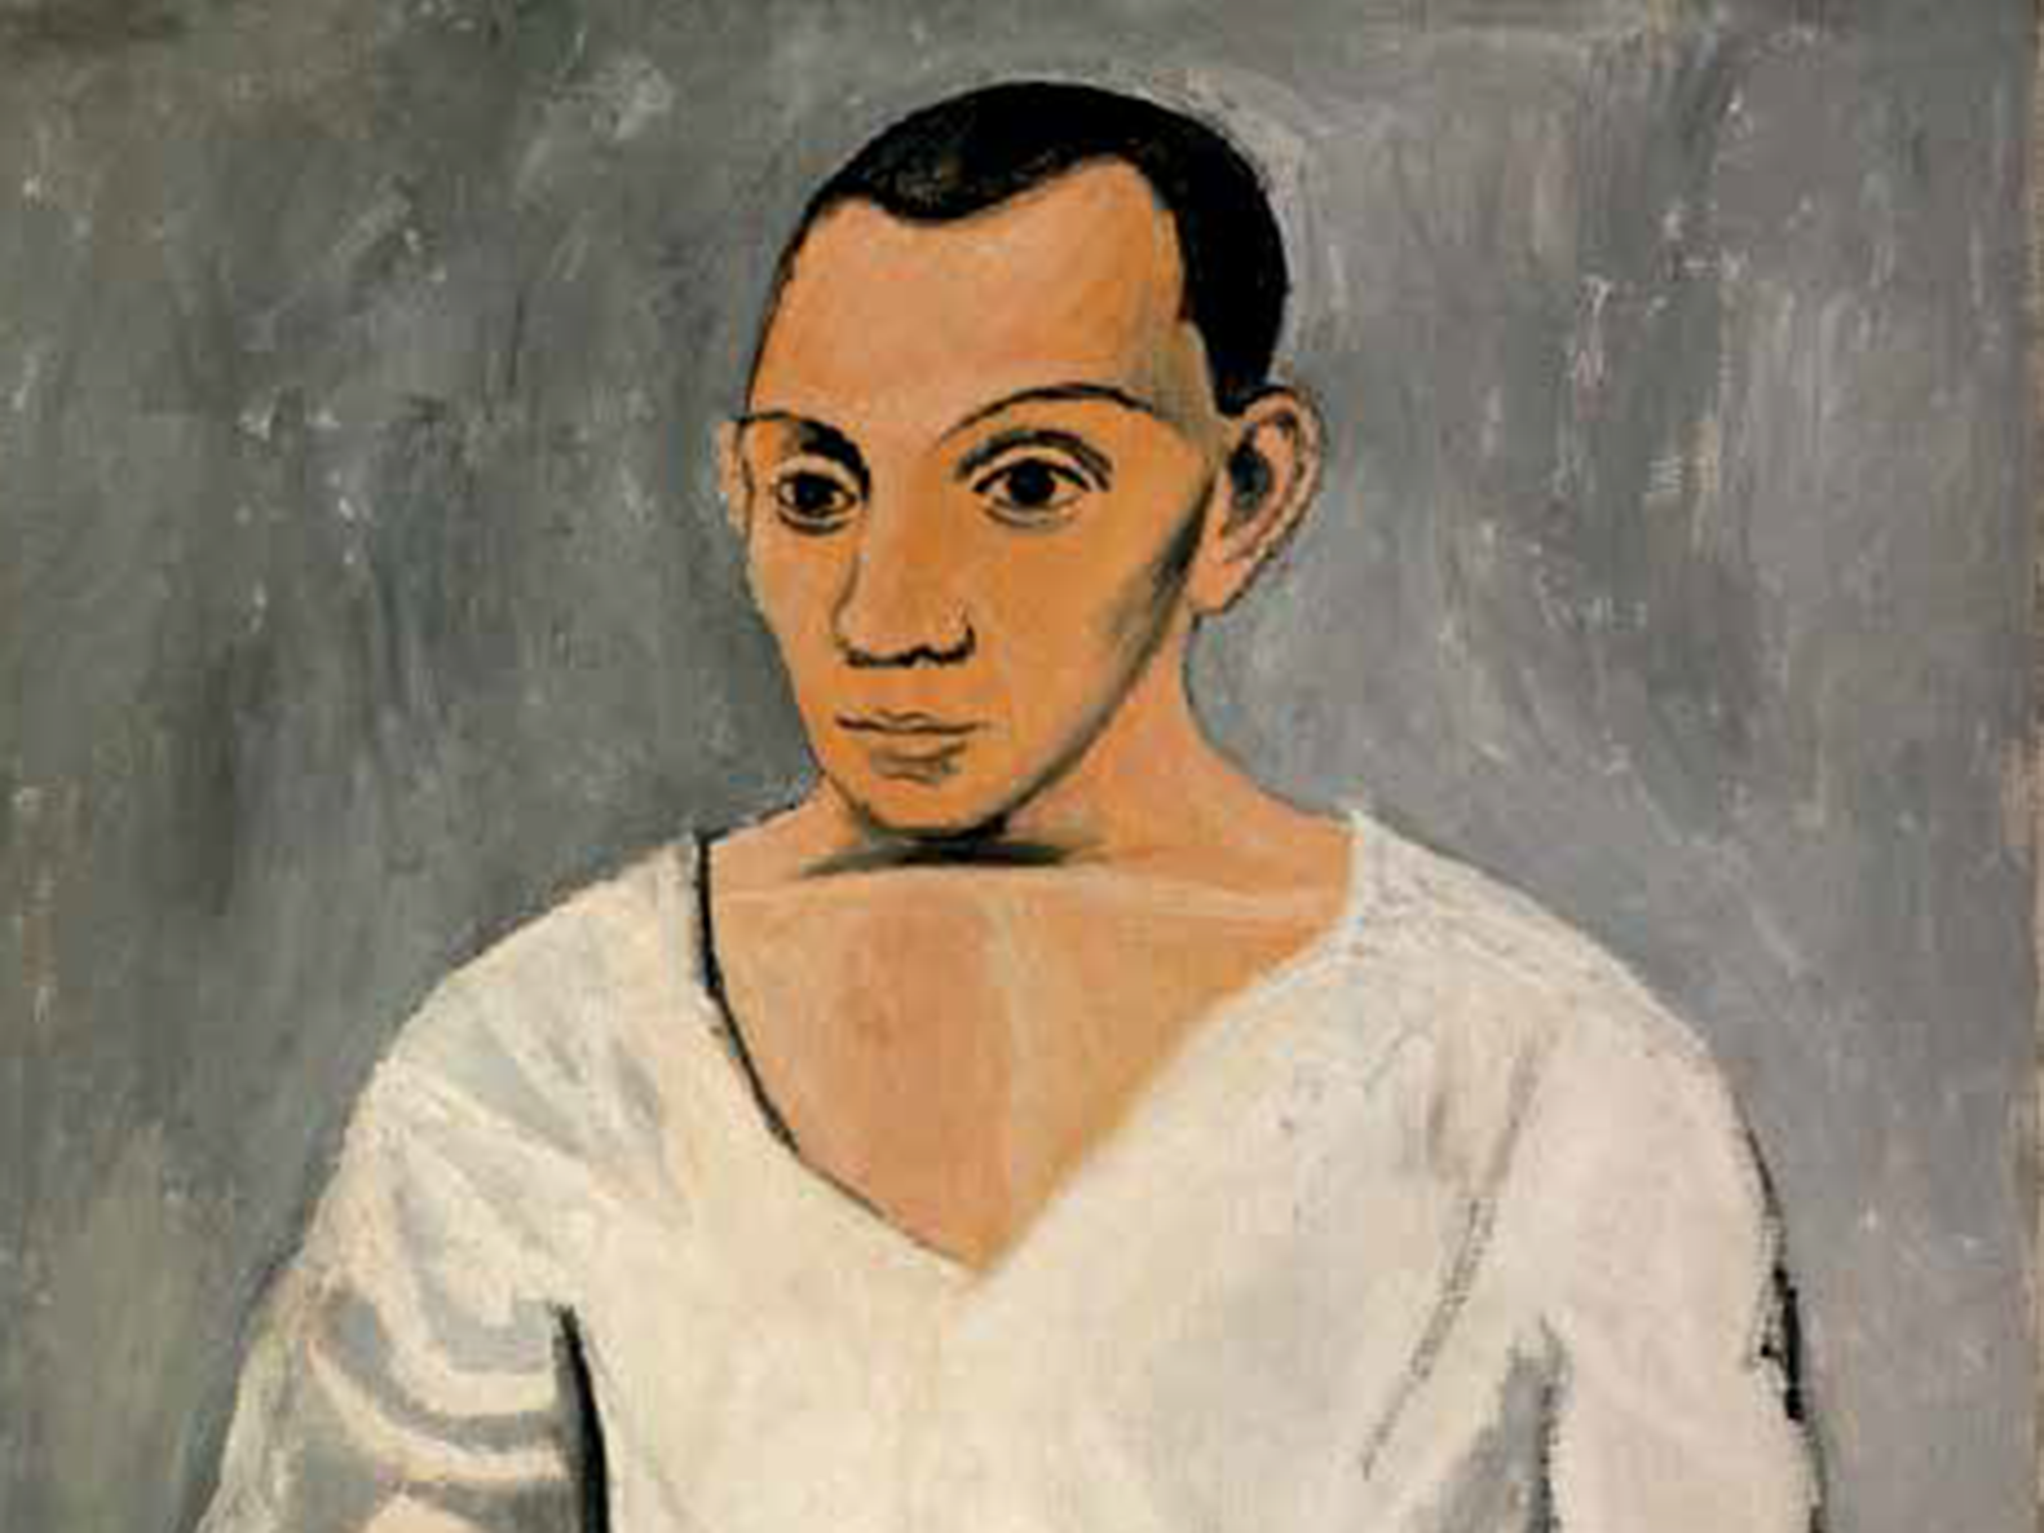 ‘Self-Portrait with Palette’, 1906, one of the more austere works of Picasso’s career, but true to life: he was known for being hard to read